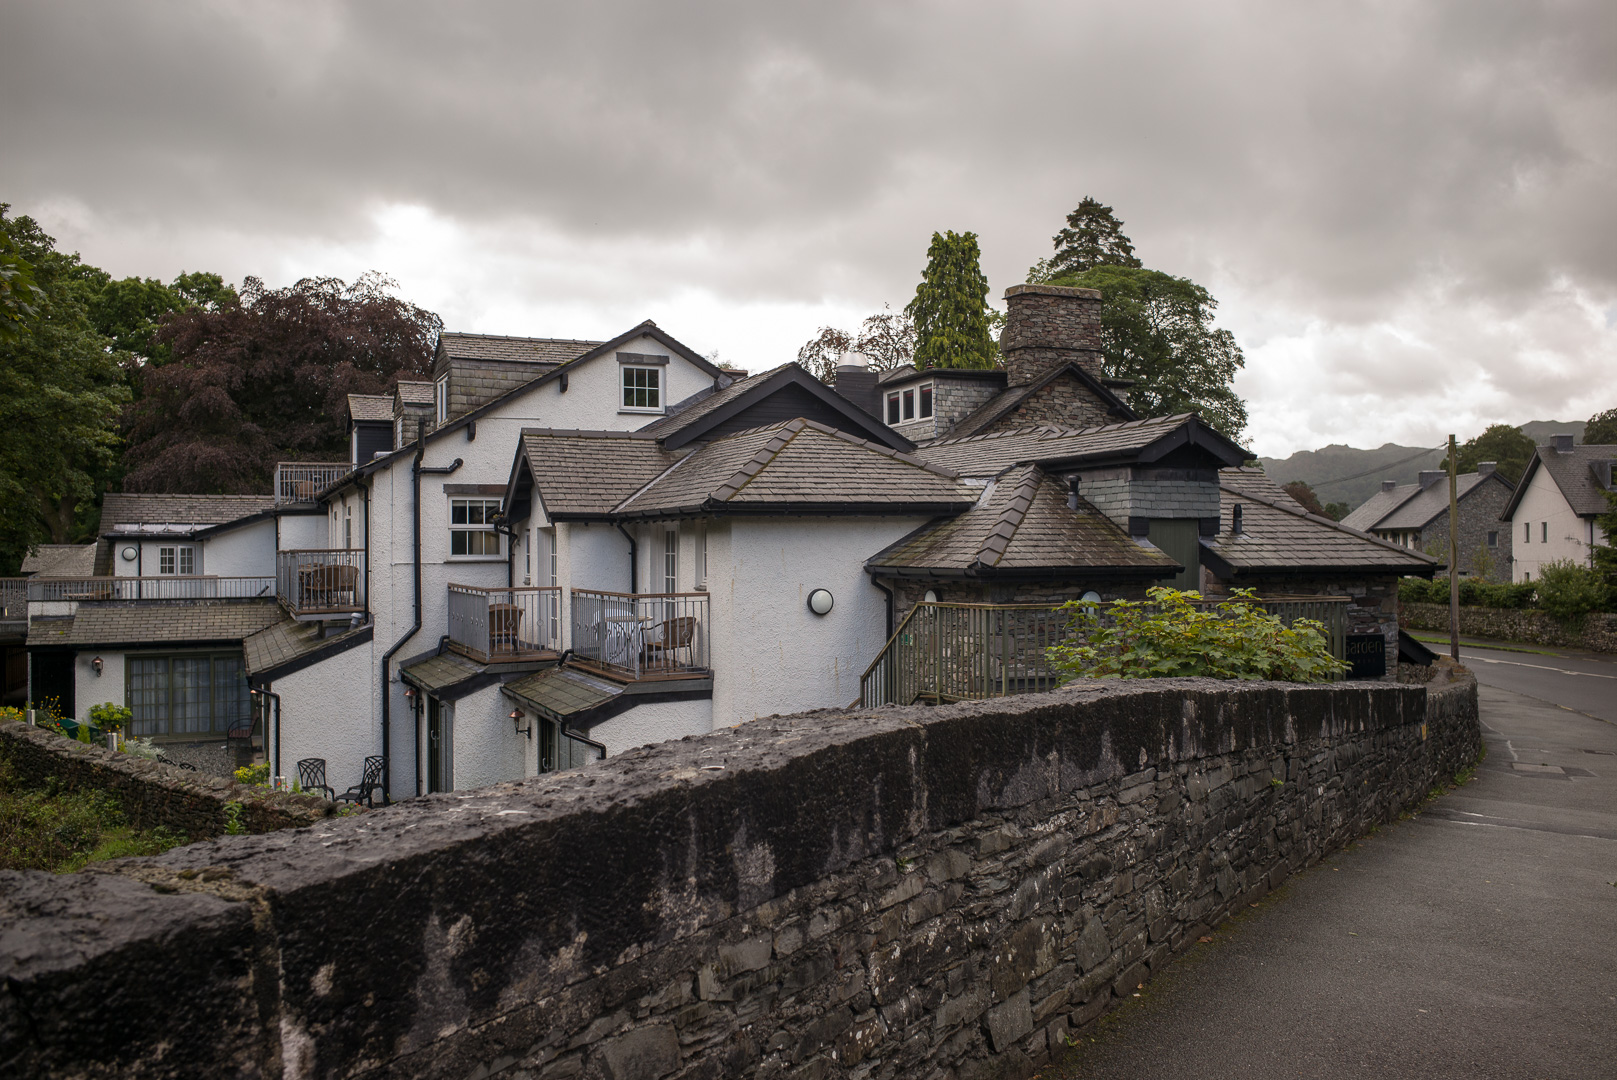 Grasmere, home of Wordsworth, and quite a charming village.